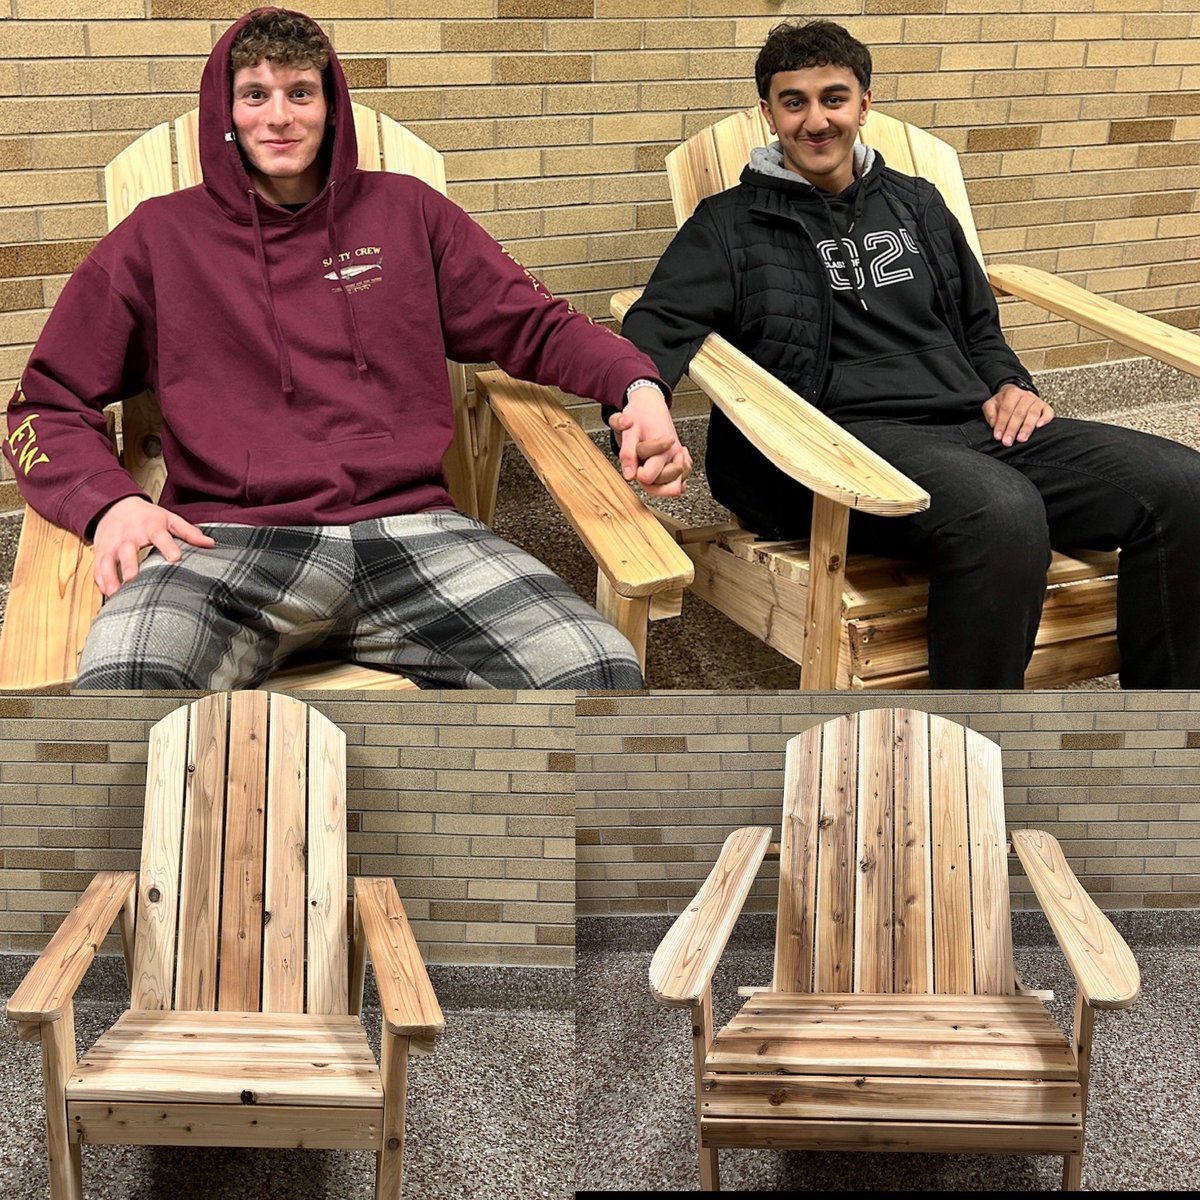 A few of the Cedar Adirondack chairs from Production Systems class this year.
#TechEd